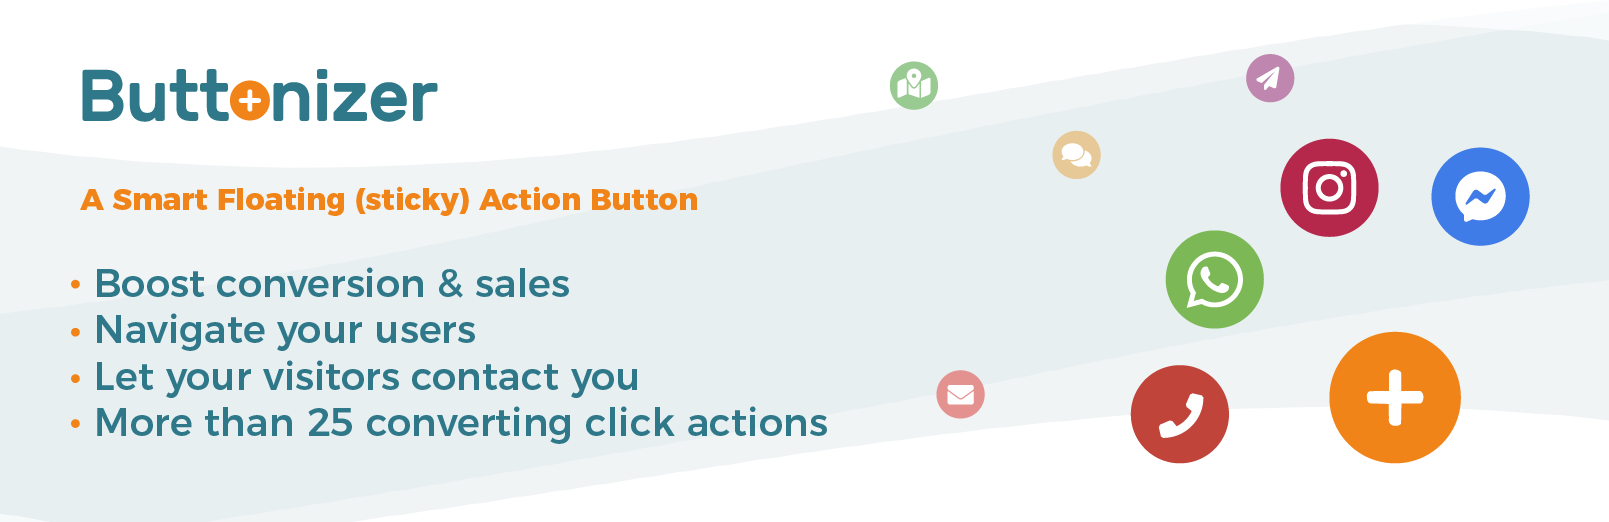 Smart Floating / Sticky Buttons – Call, Sharing, Chat Widgets & More – Buttonizer